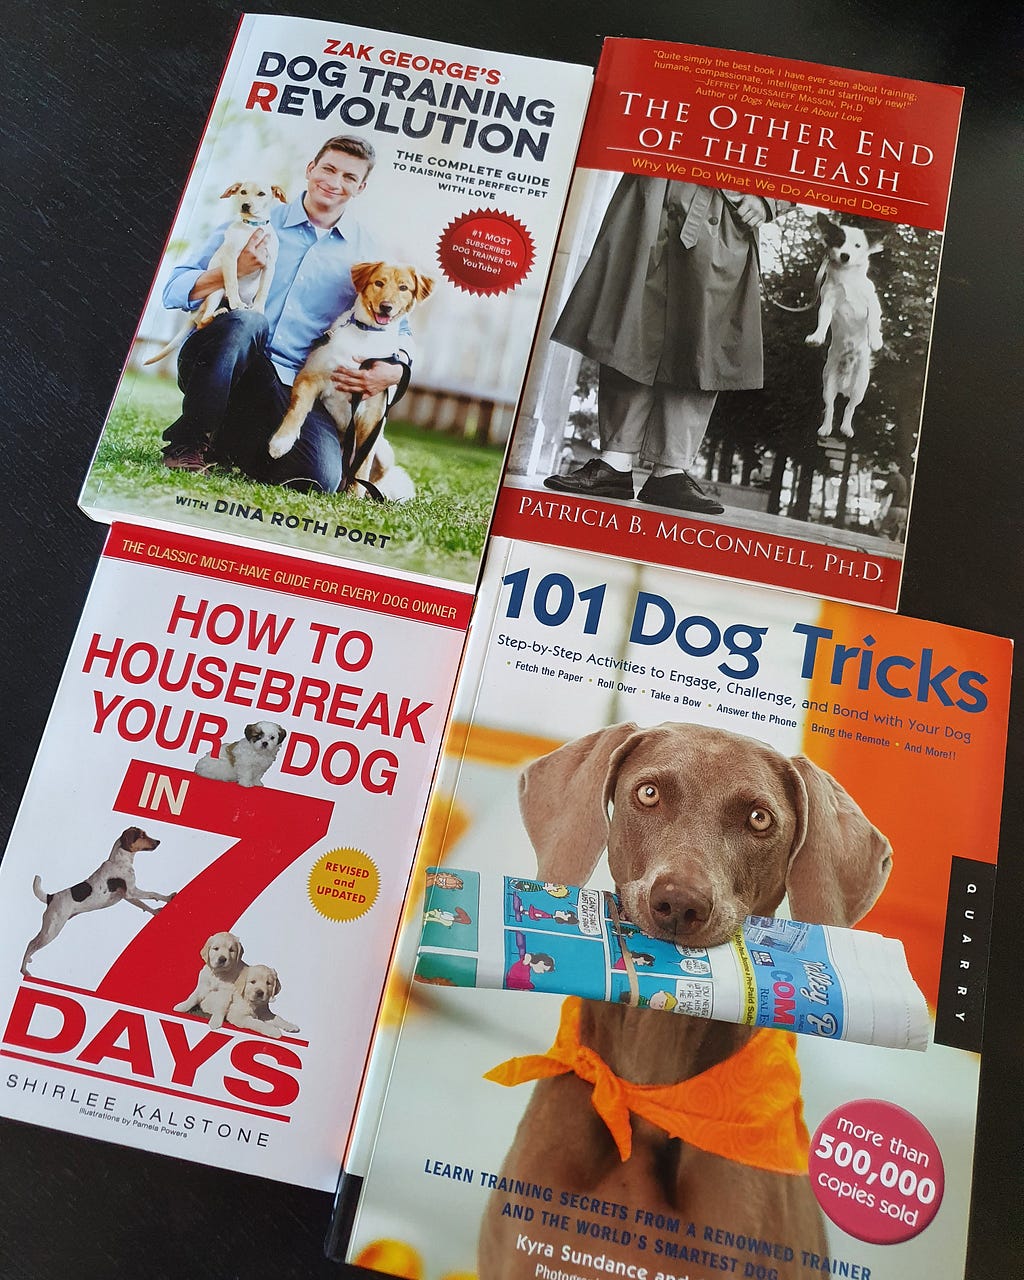 These books are part of my birthday present this year!